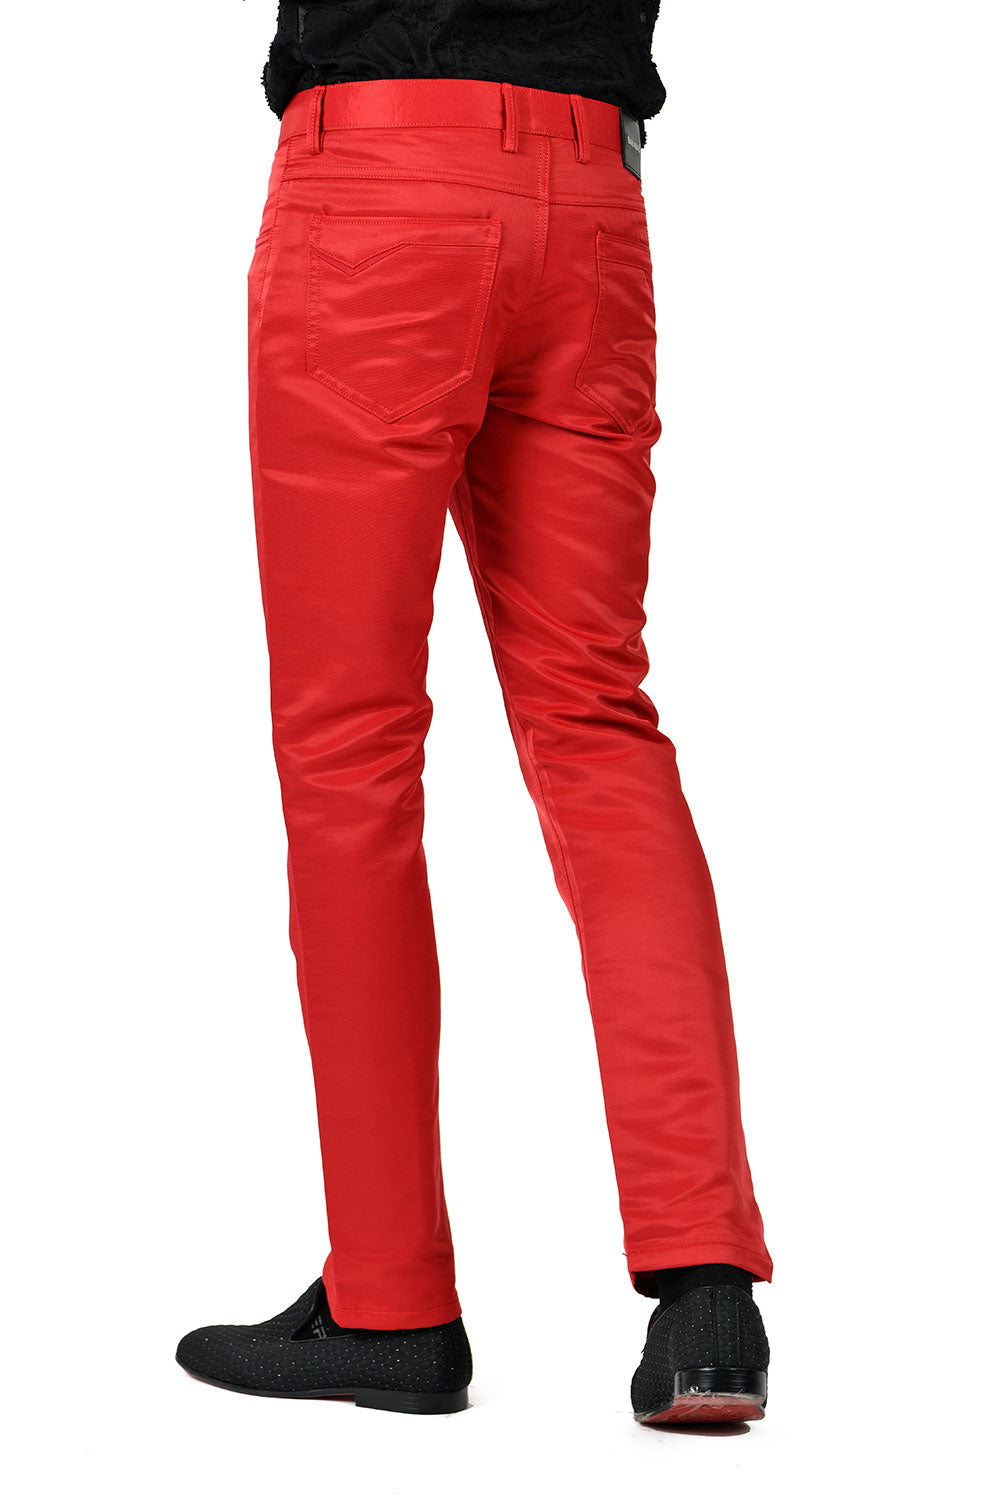 BARABAS Men's Shiny Solid Color Red Chino Pants 2605